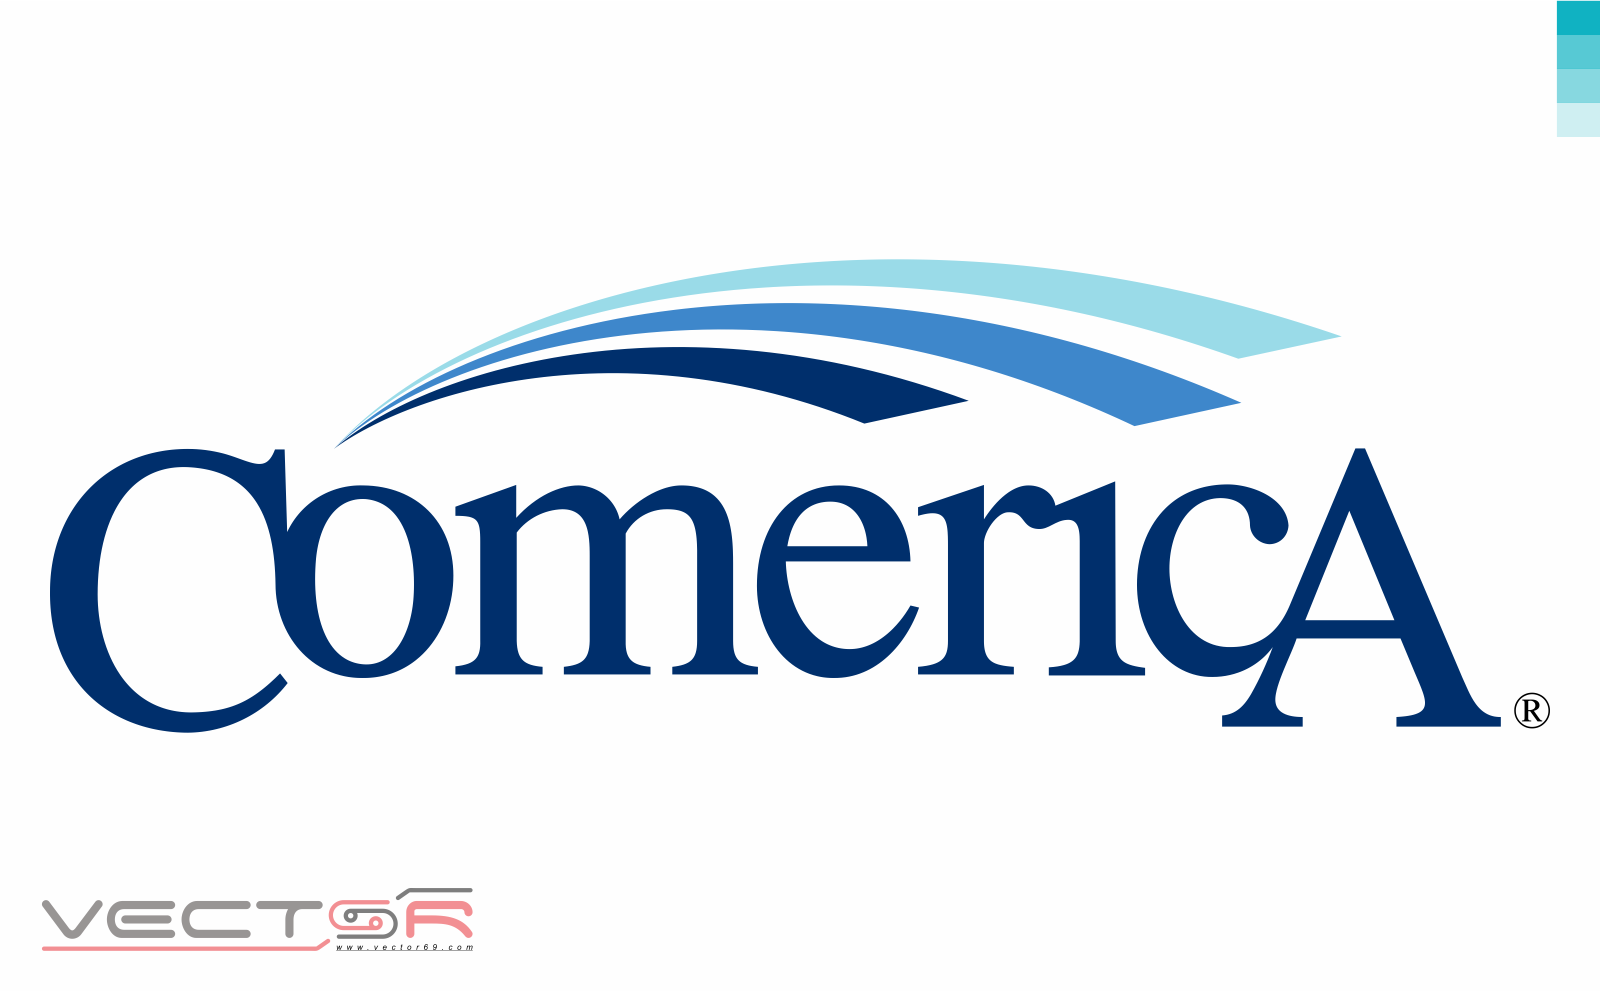 Comerica Logo - Download Vector File SVG (Scalable Vector Graphics)